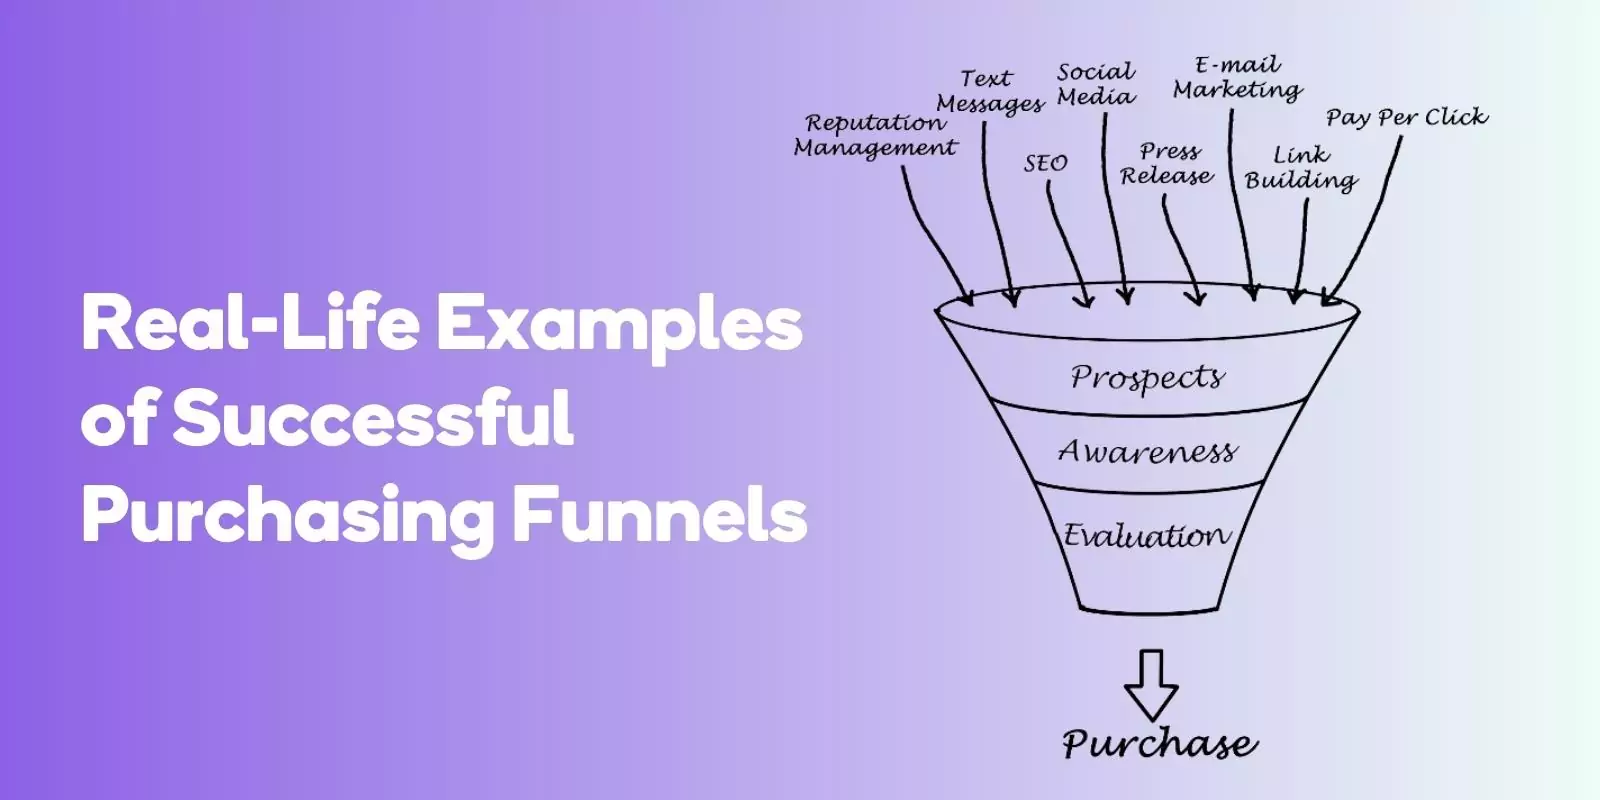 Real-Life Examples of Successful Purchasing Funnels